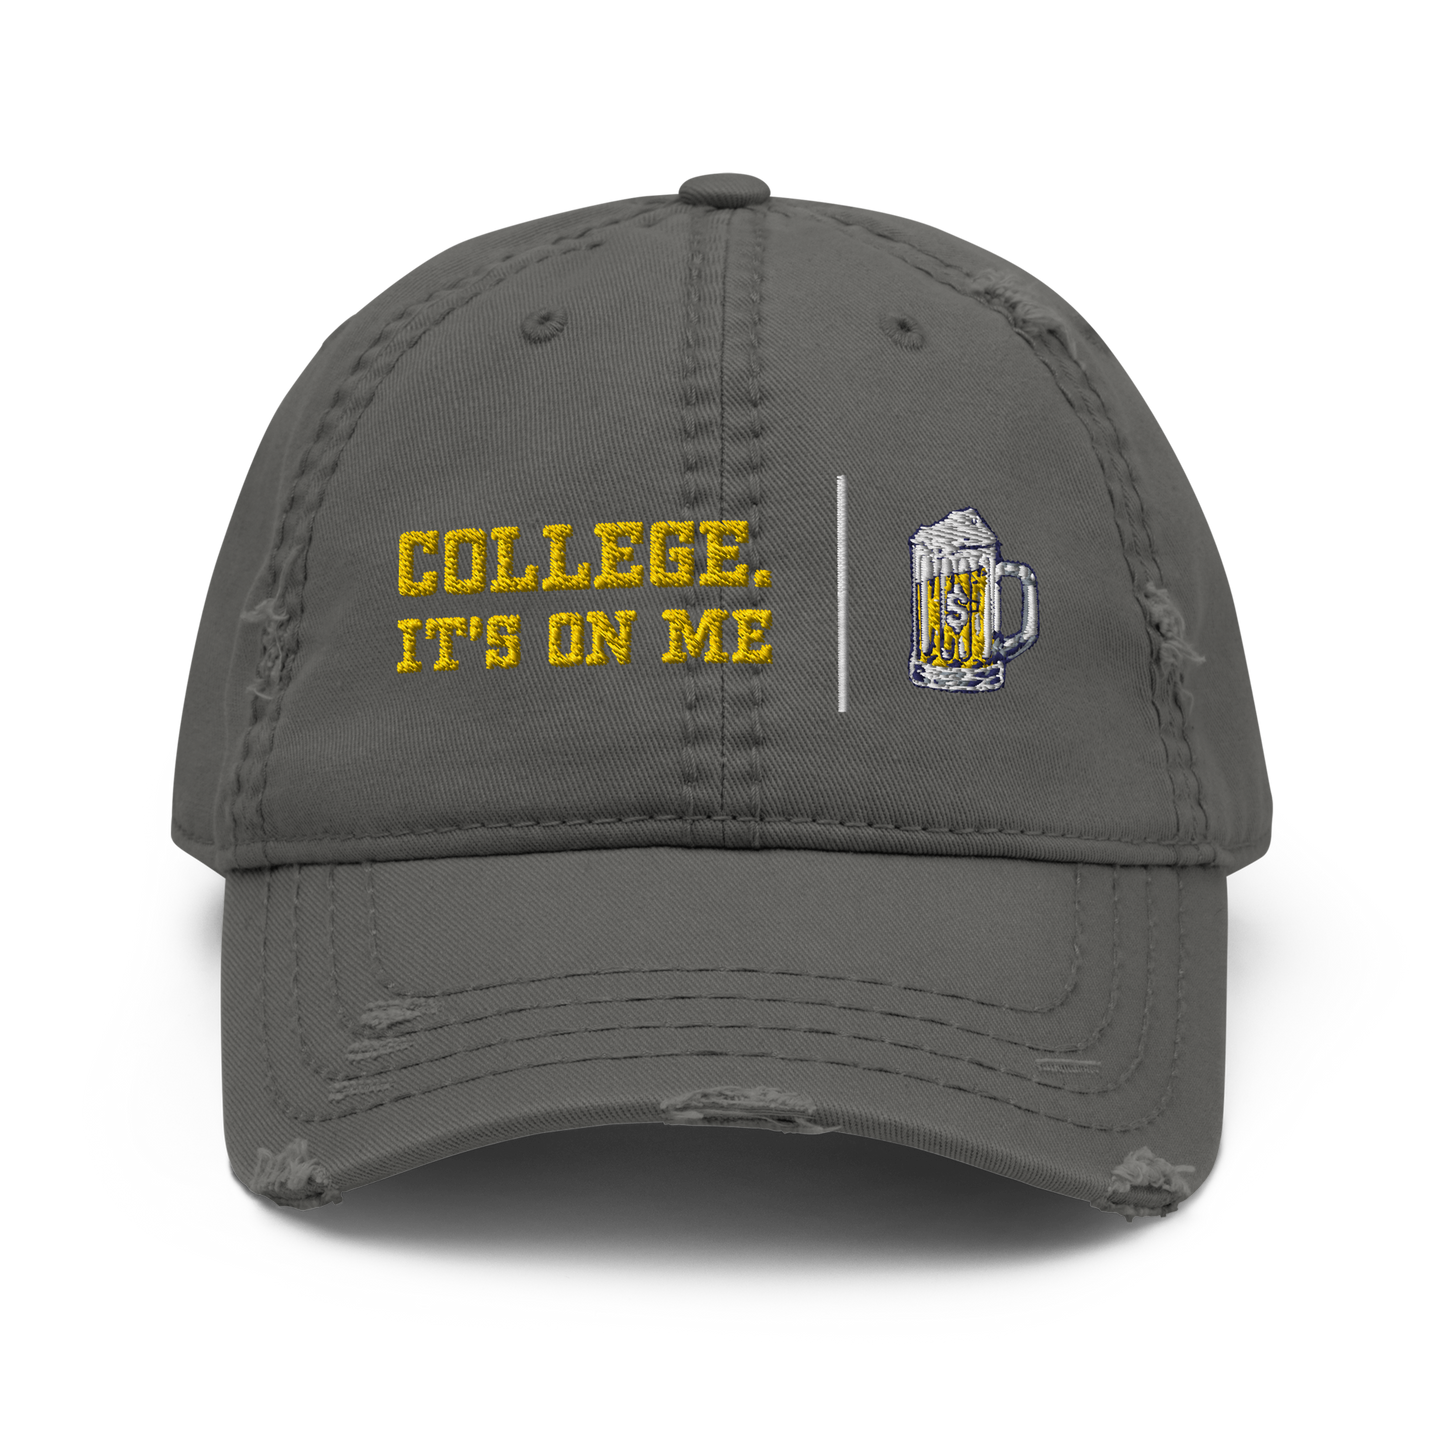 College. It's On Me - Distressed Dad Hat